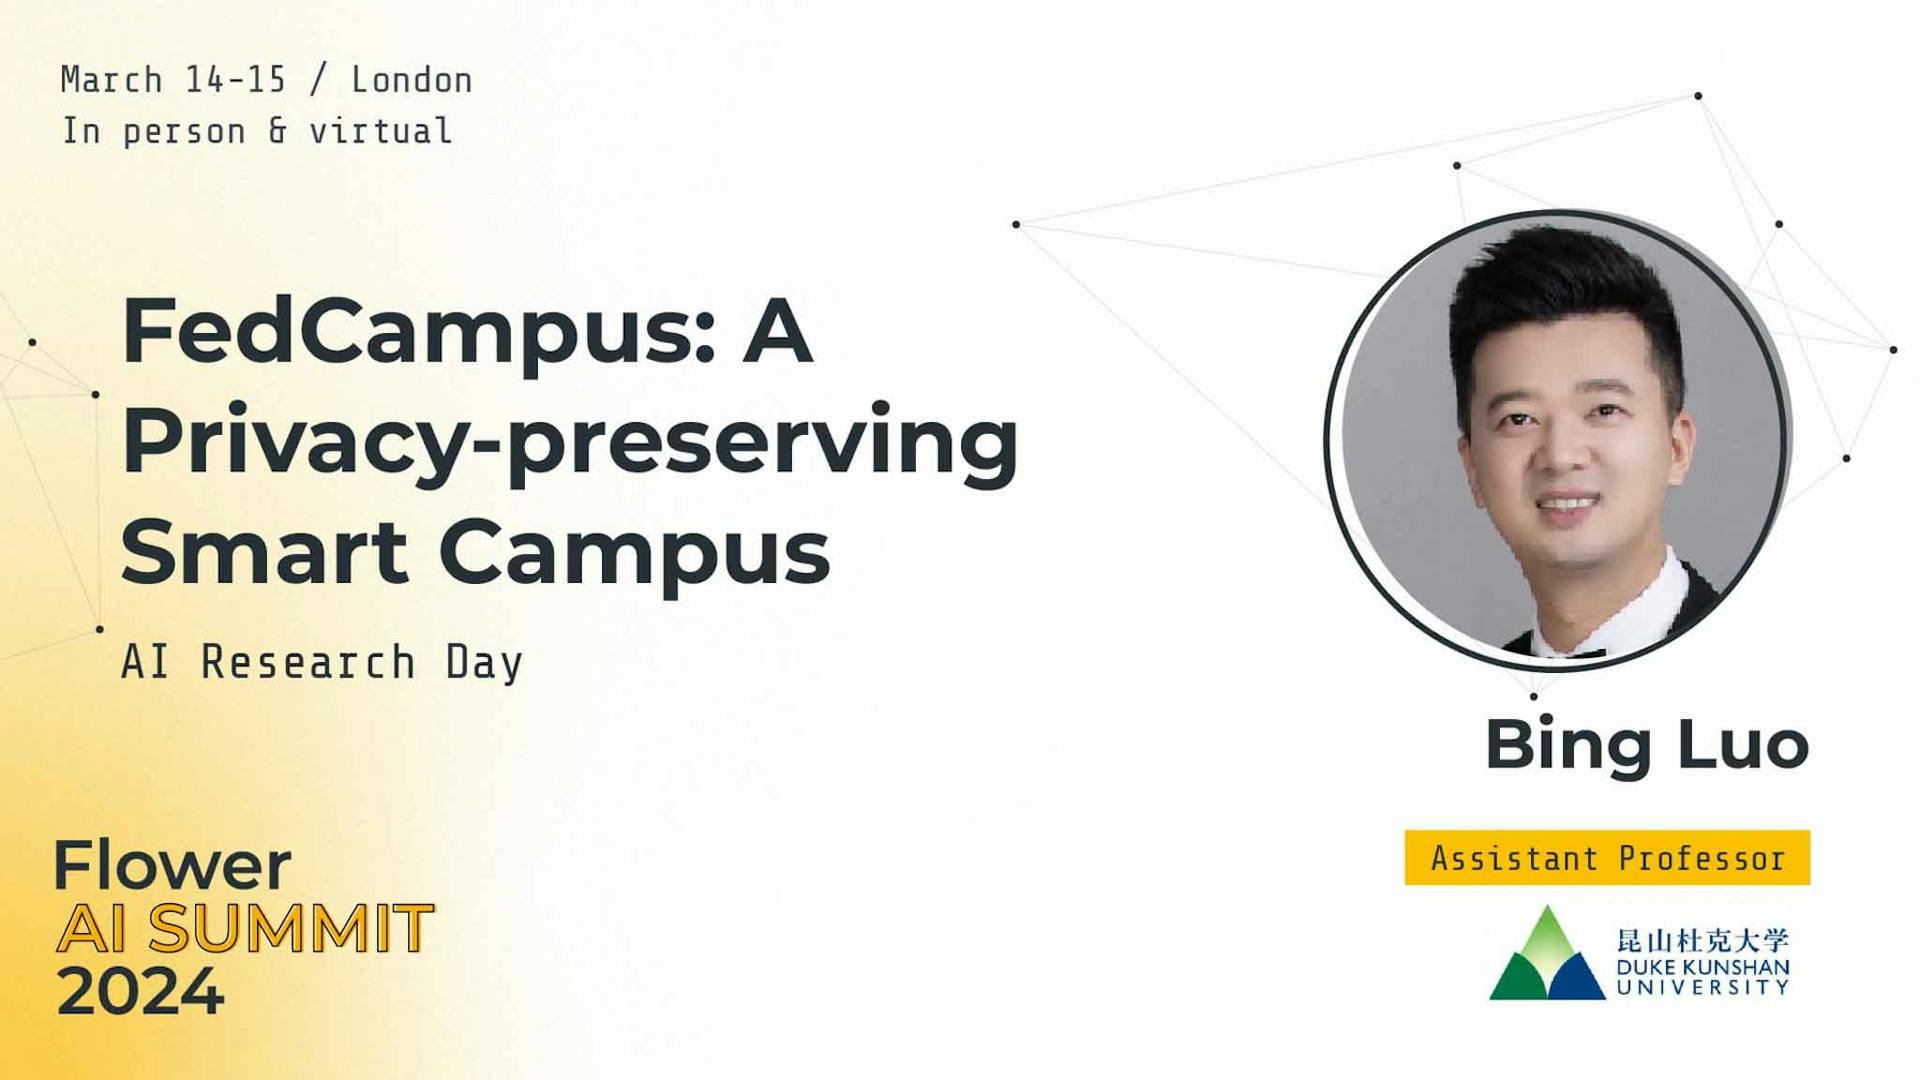 FedCampus: A Privacy-preserving Smart Campus, by Bing Luo and Steven He